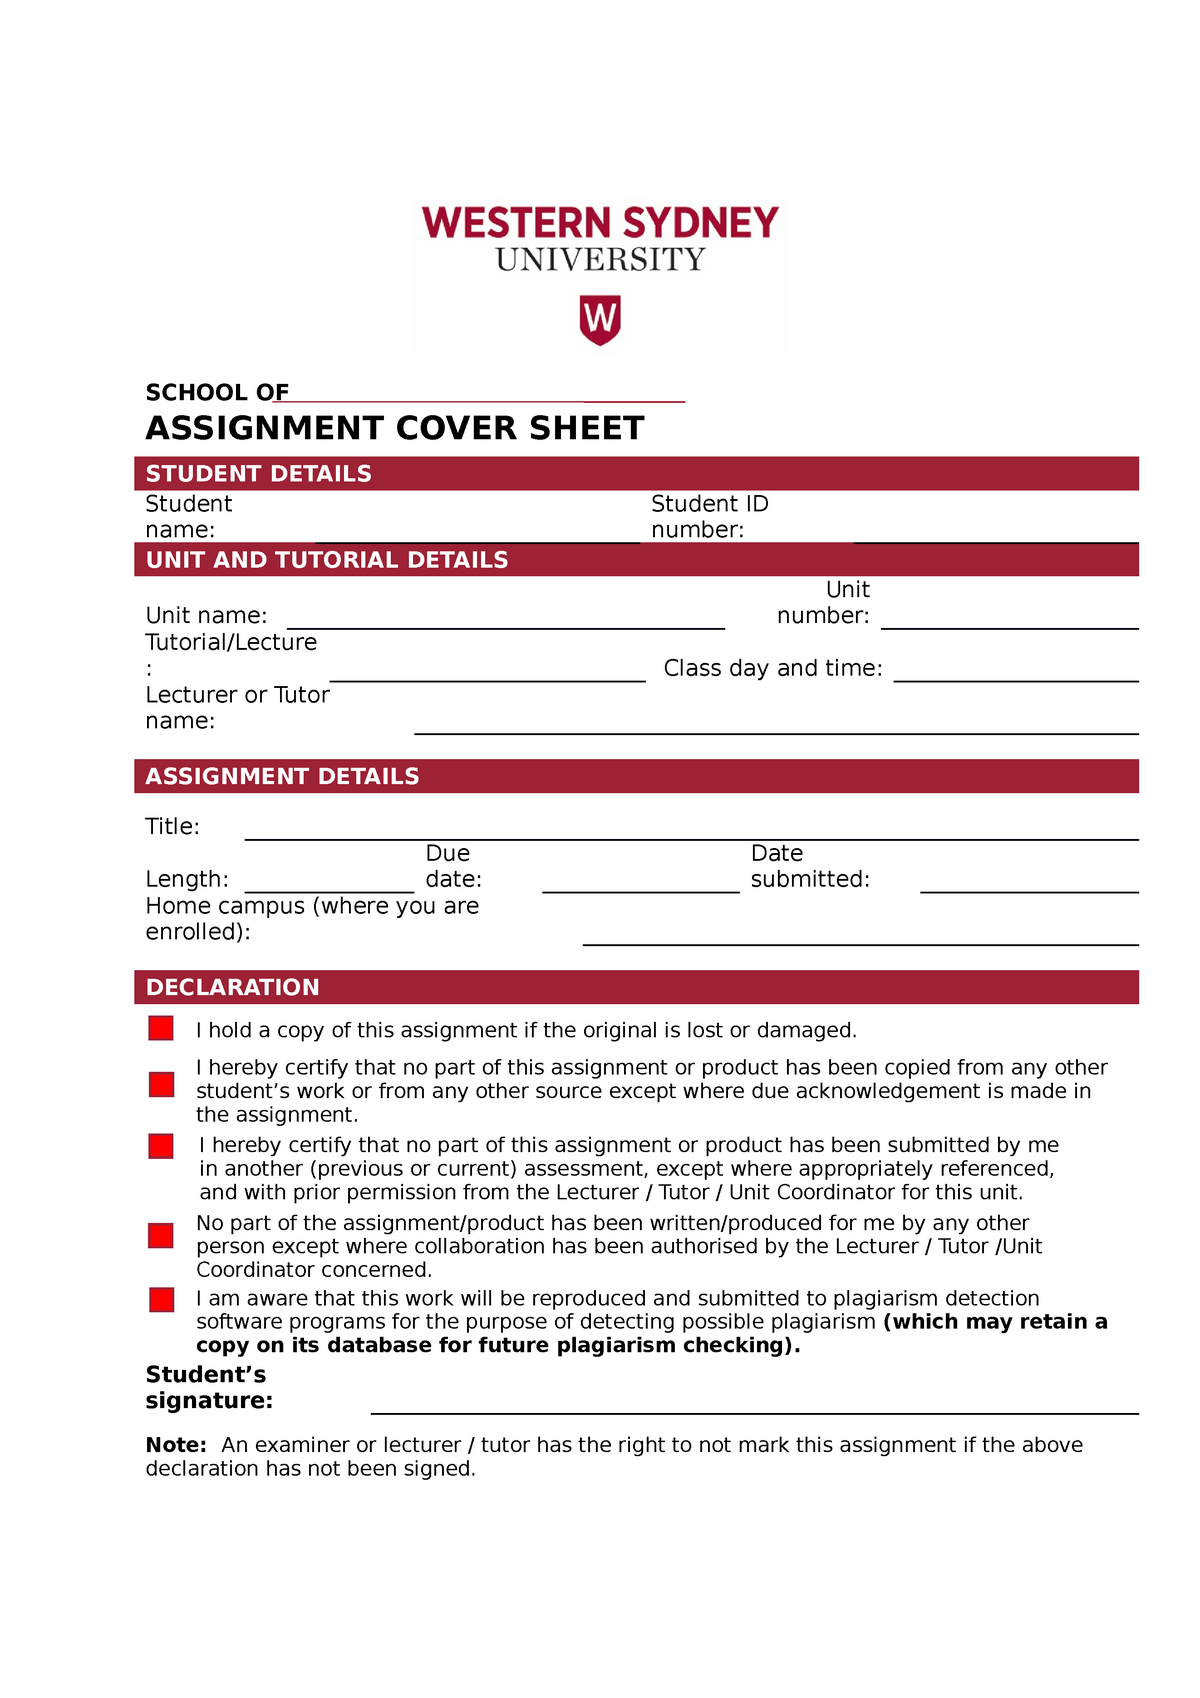 uws assignment cover sheet